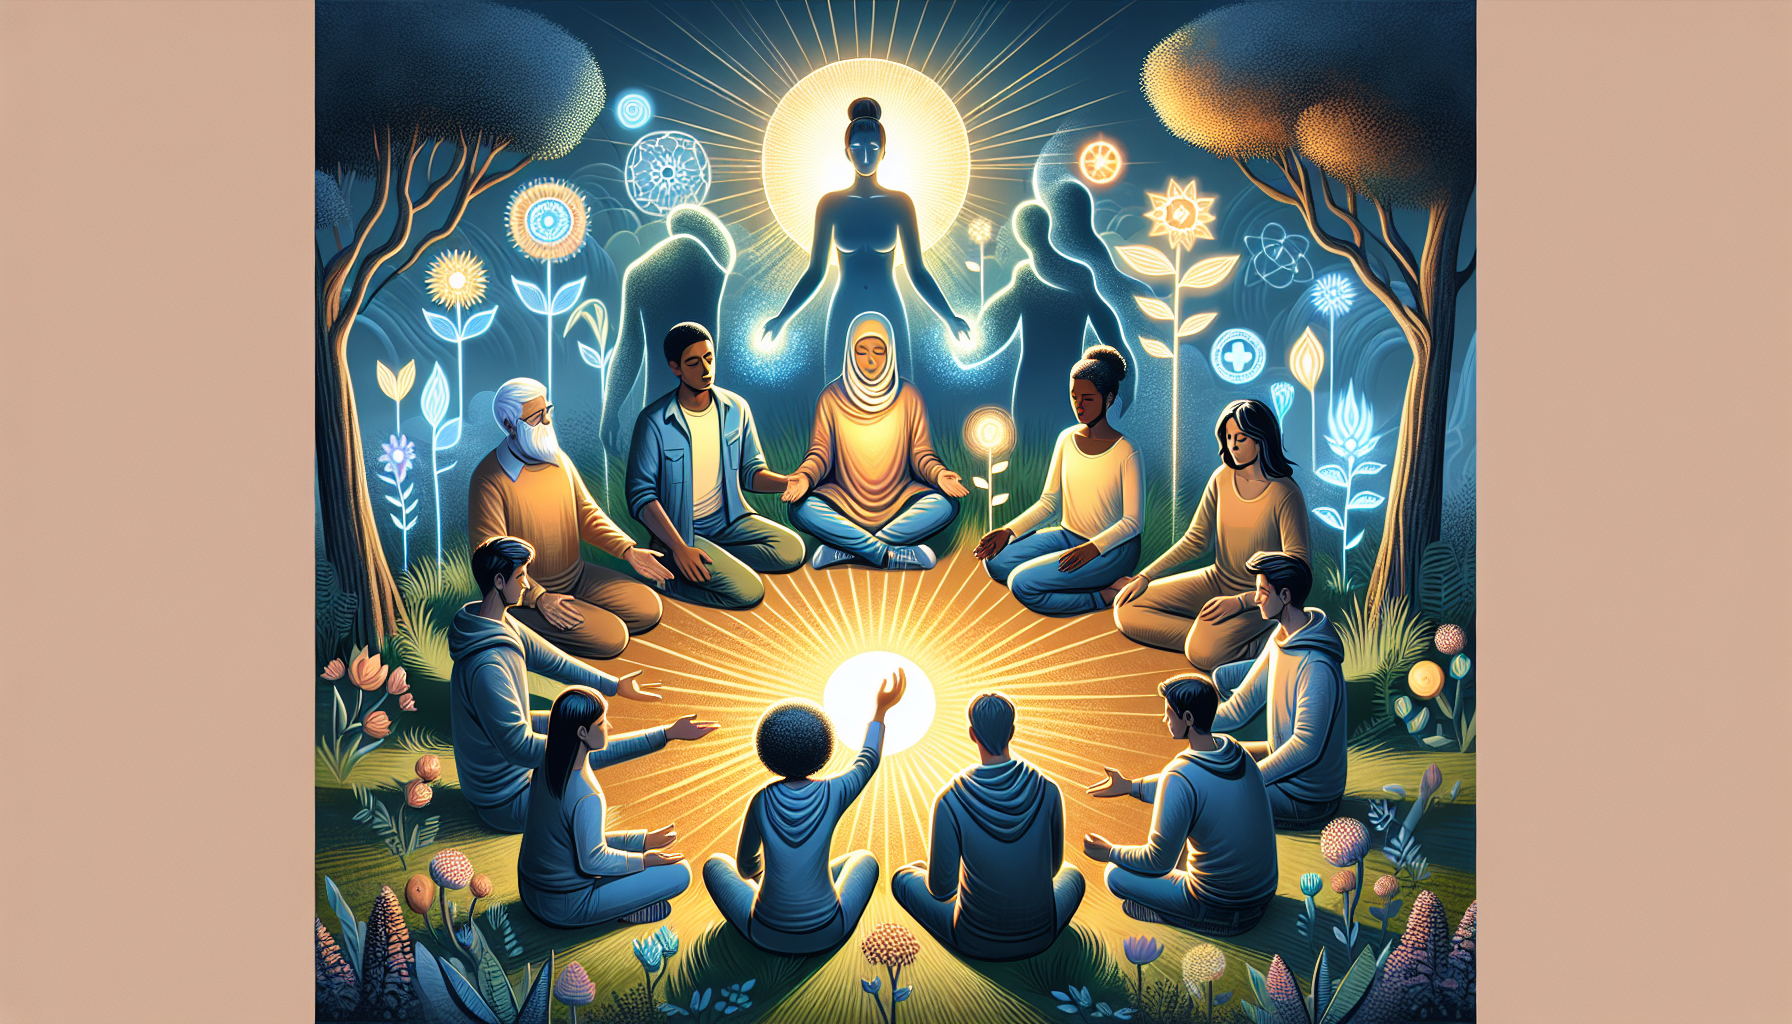 Illustration of individuals overcoming substance abuse within a therapeutic community